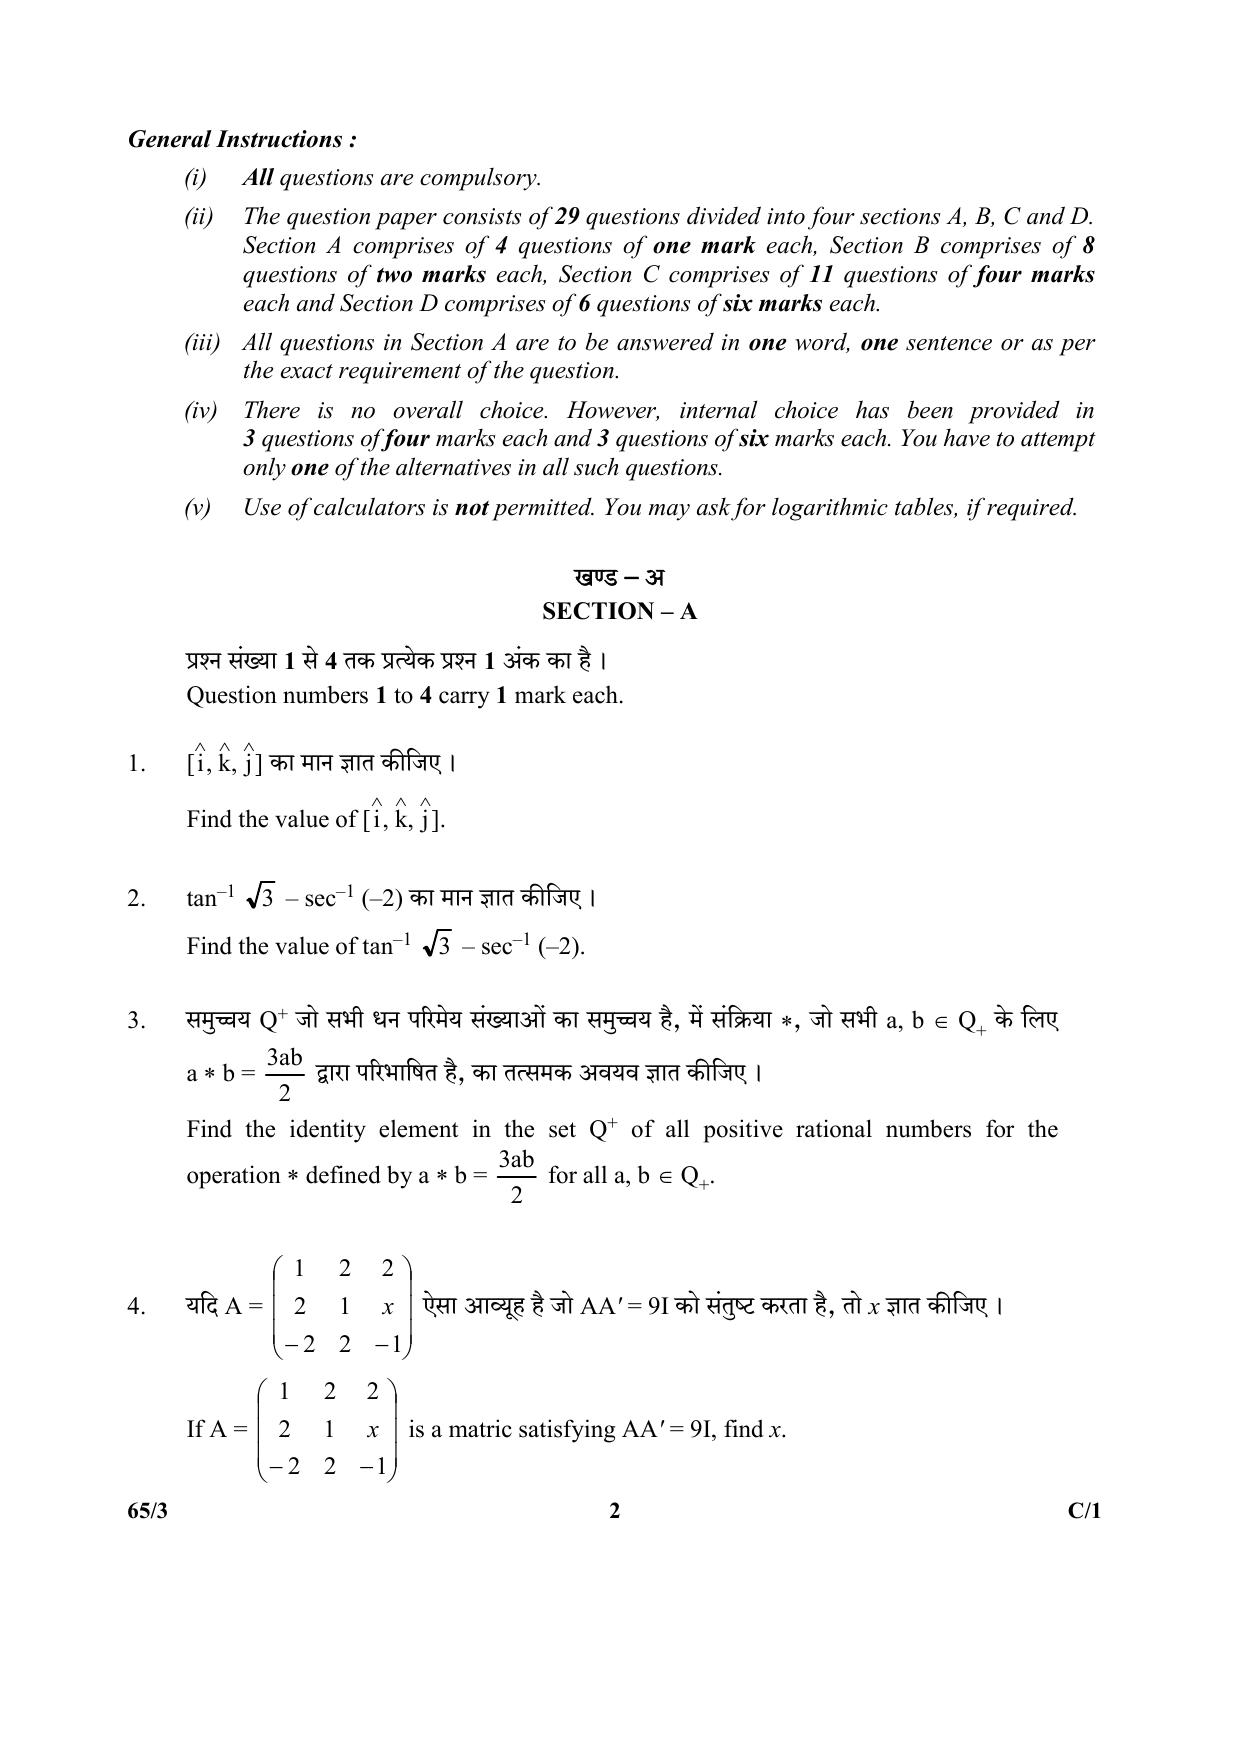 CBSE Class 12 65-3 (Mathematics) 2018 Compartment Question Paper - Page 2